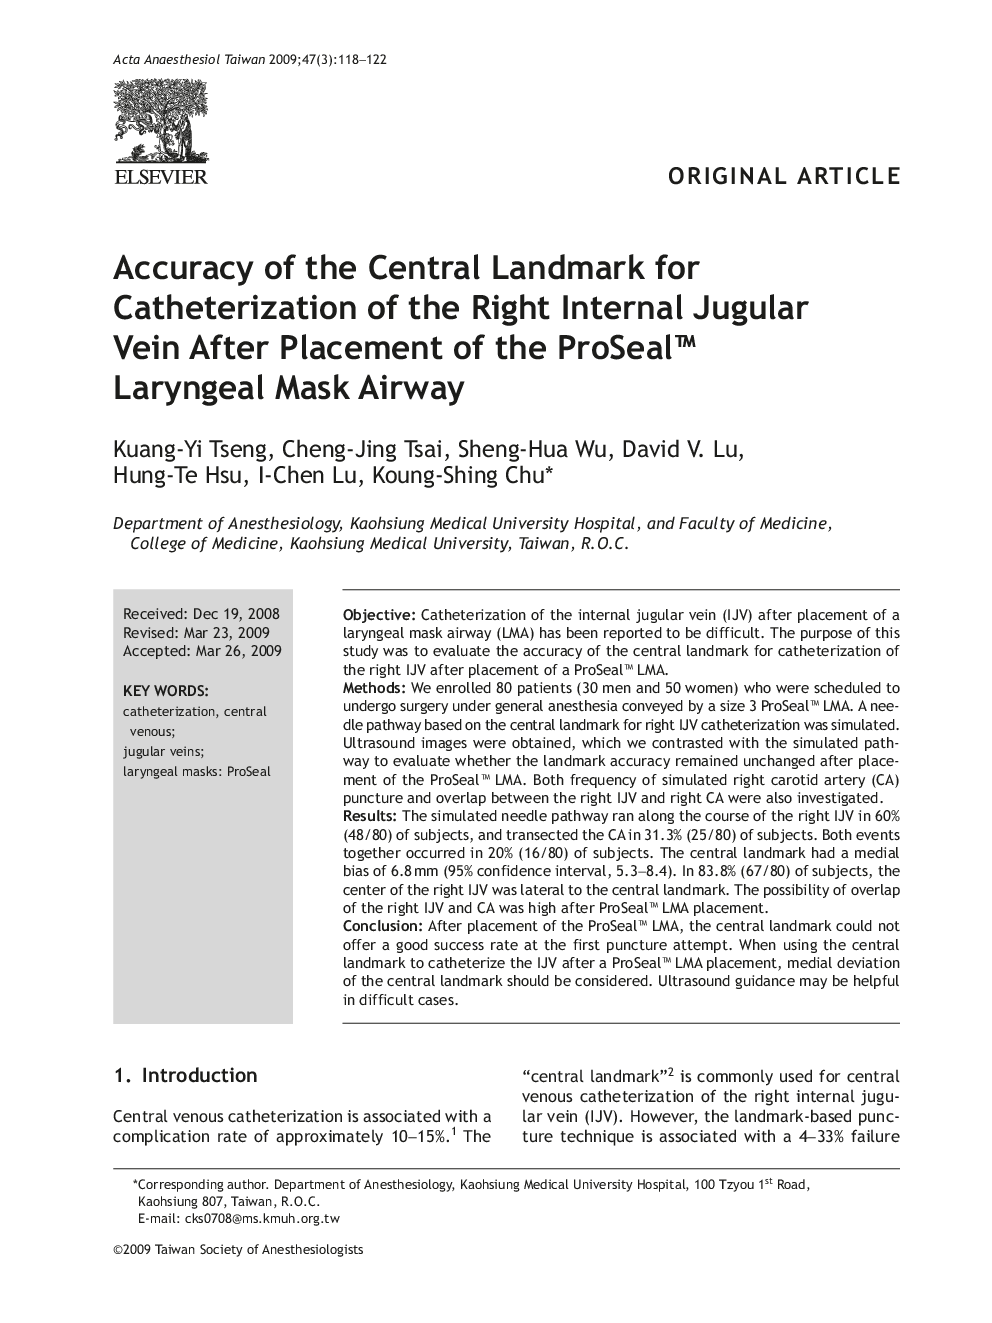 Accuracy of the Central Landmark for Catheterization of the Right Internal Jugular Vein After Placement of the ProSeal™ Laryngeal Mask Airway